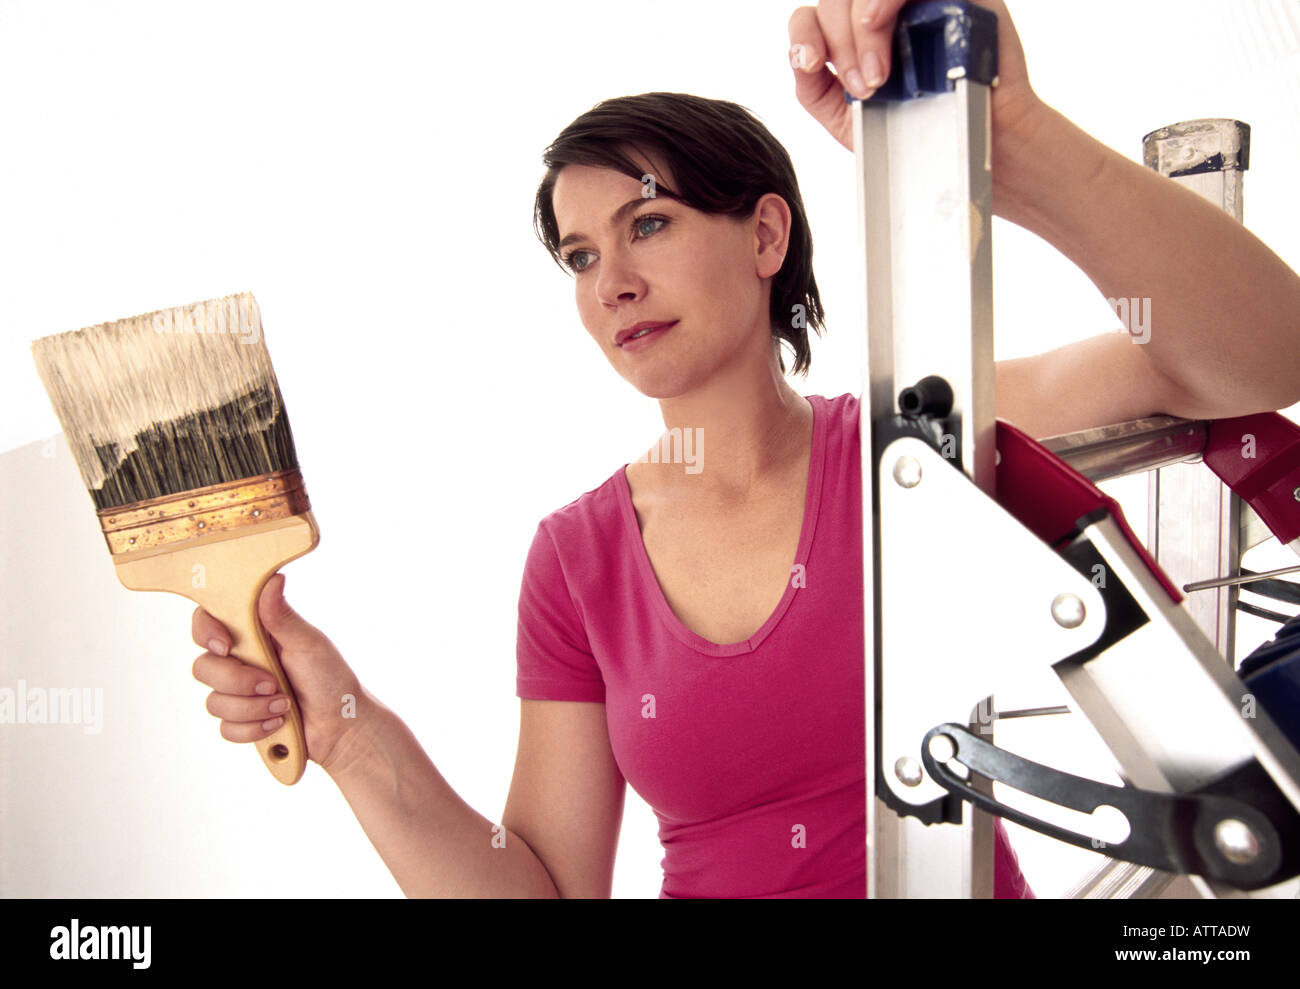 Young woman painting wall Stock Photo